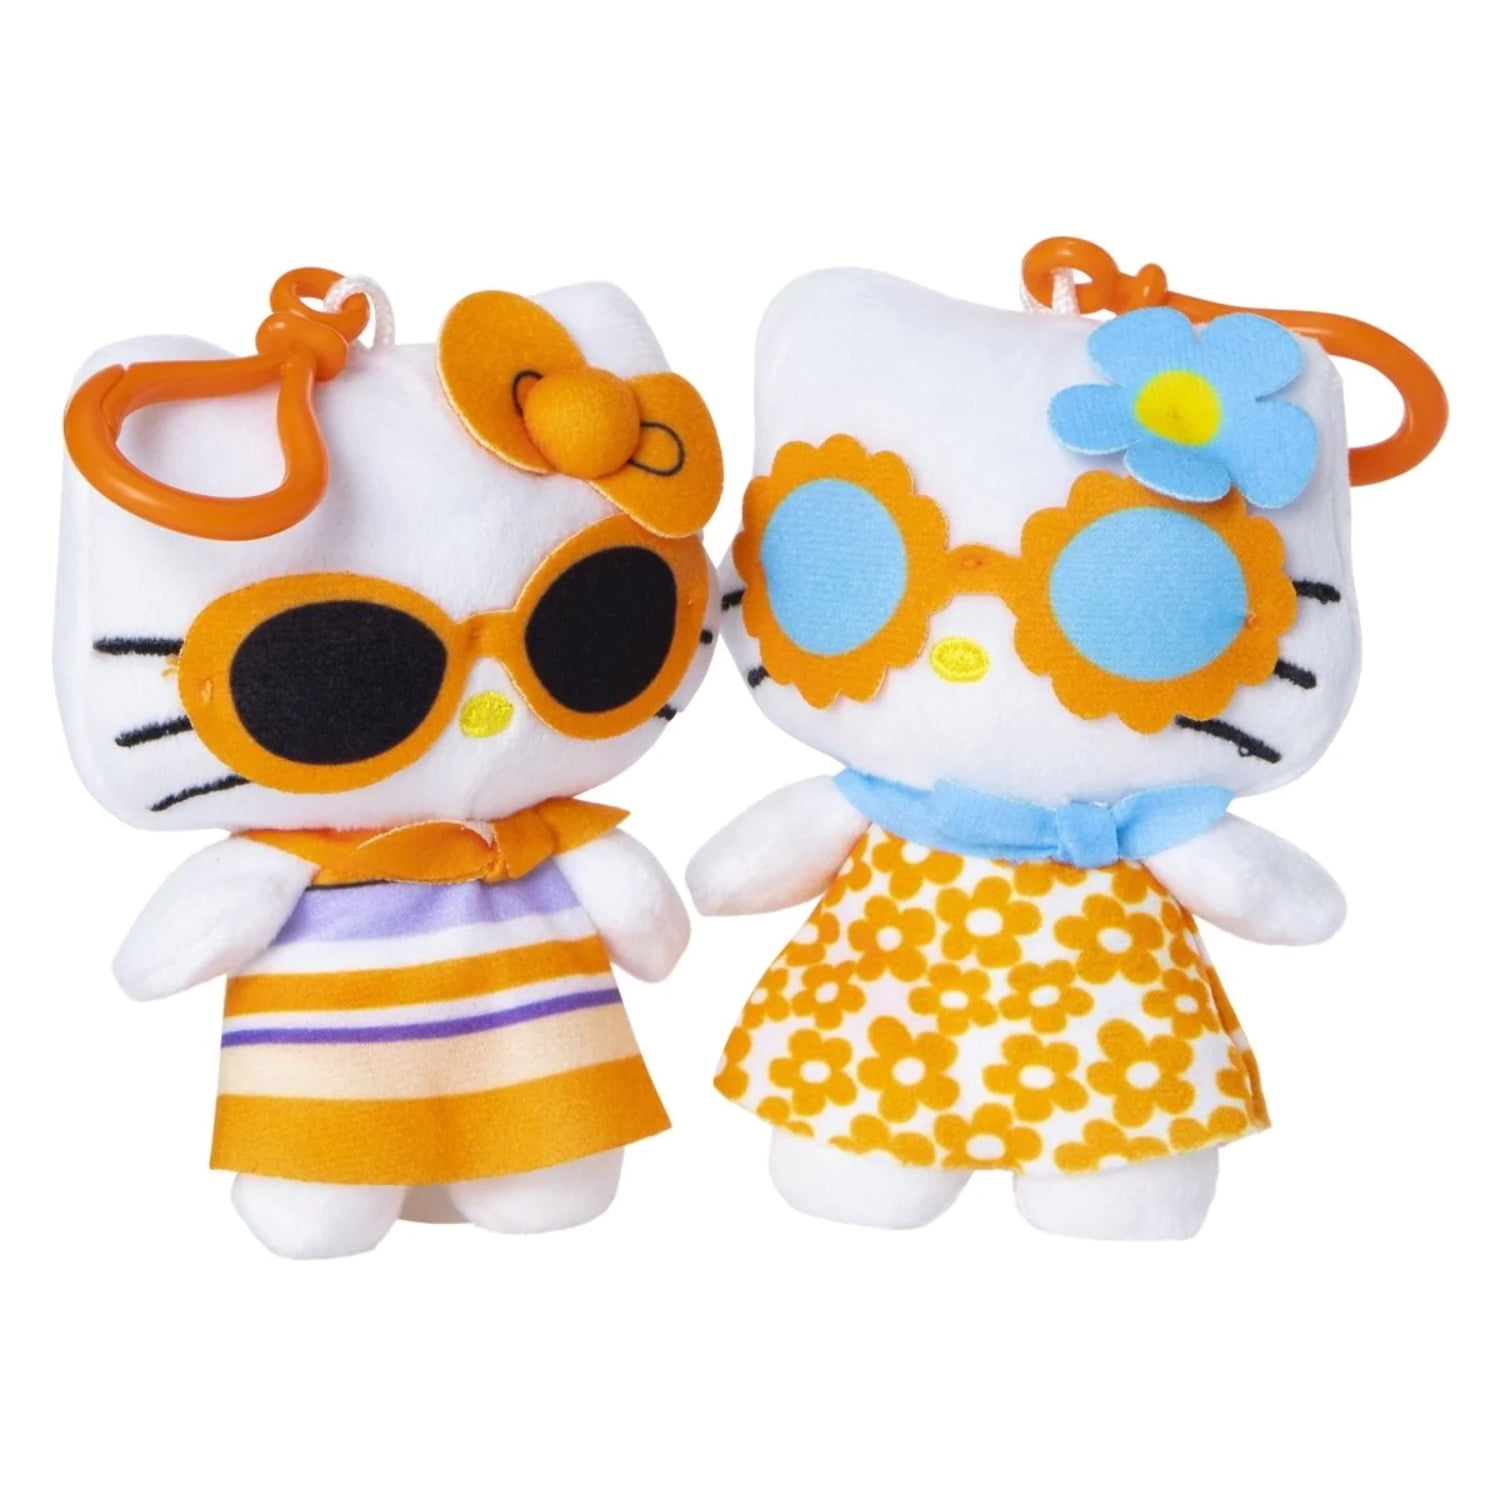 Hello Kitty And Friends® Series 1 Plush Danglers Blind Bag Toy